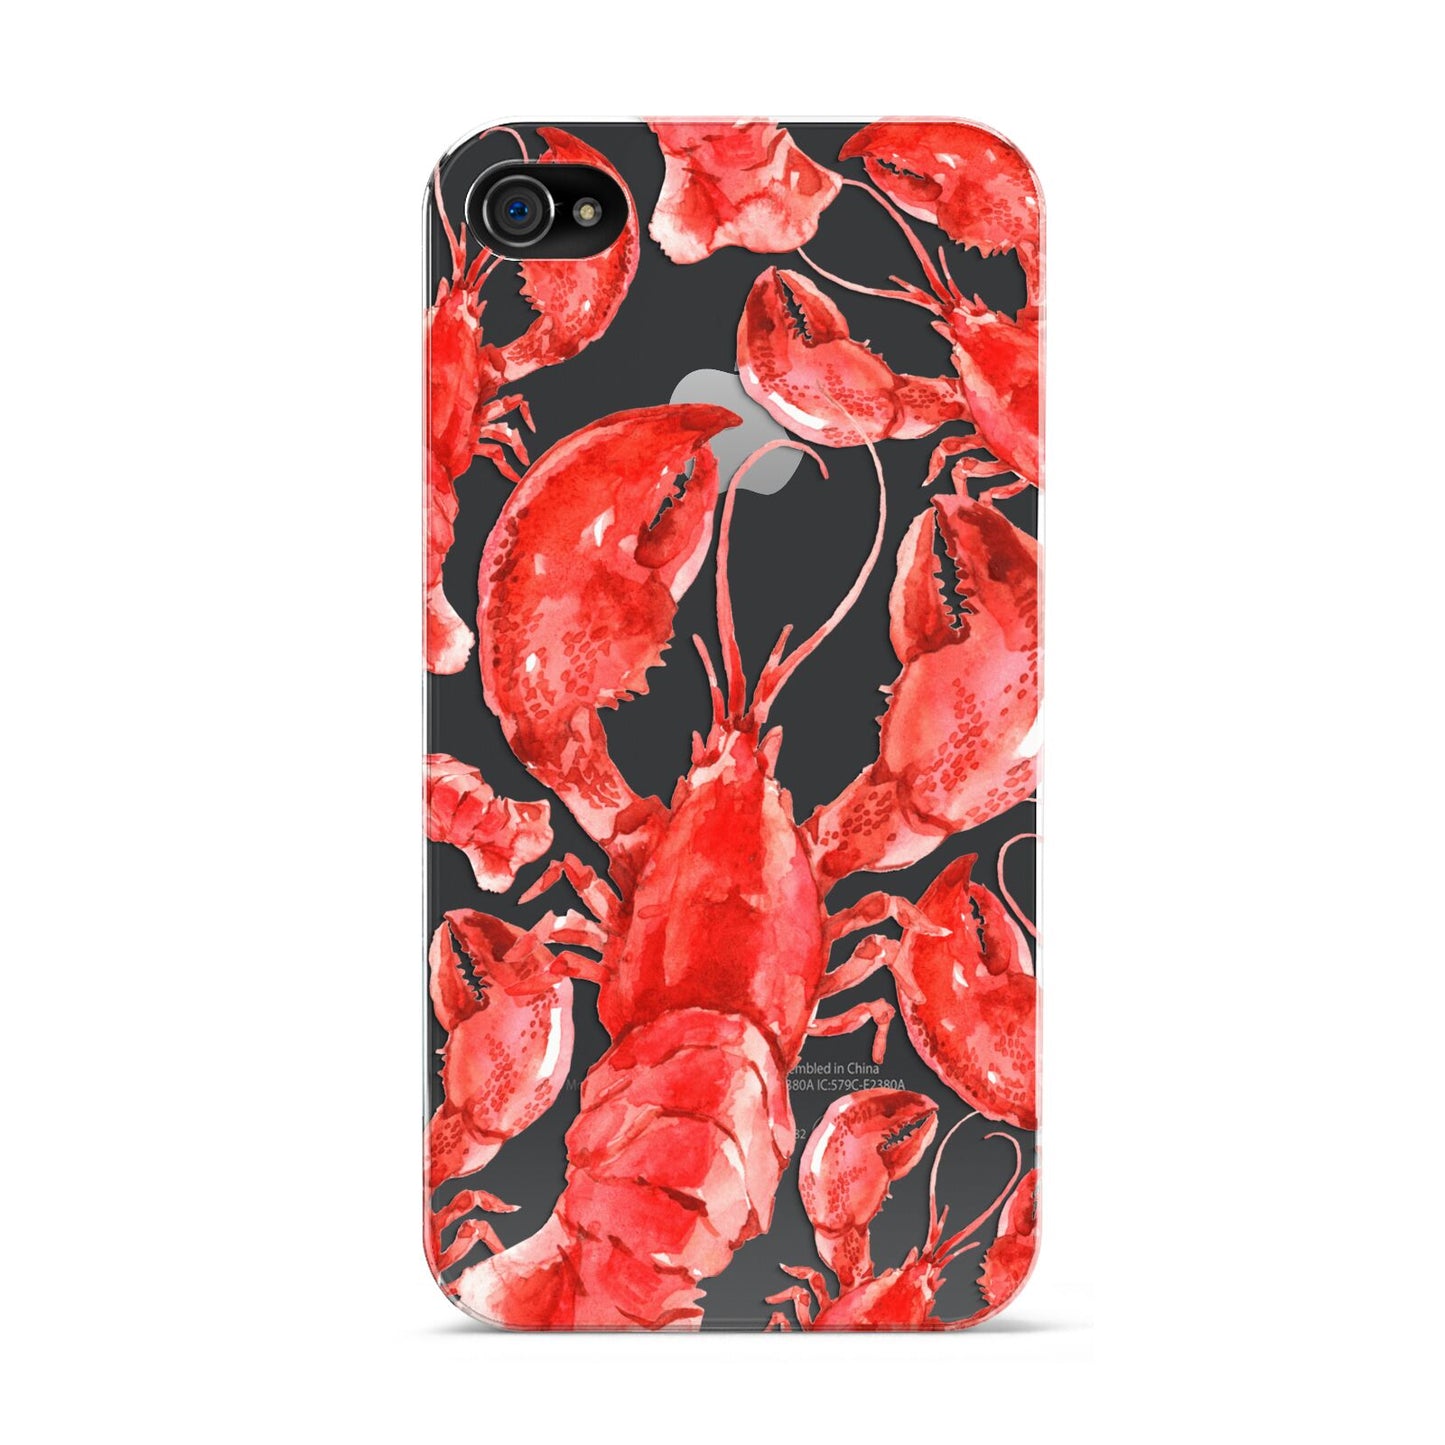 Lobster Apple iPhone 4s Case